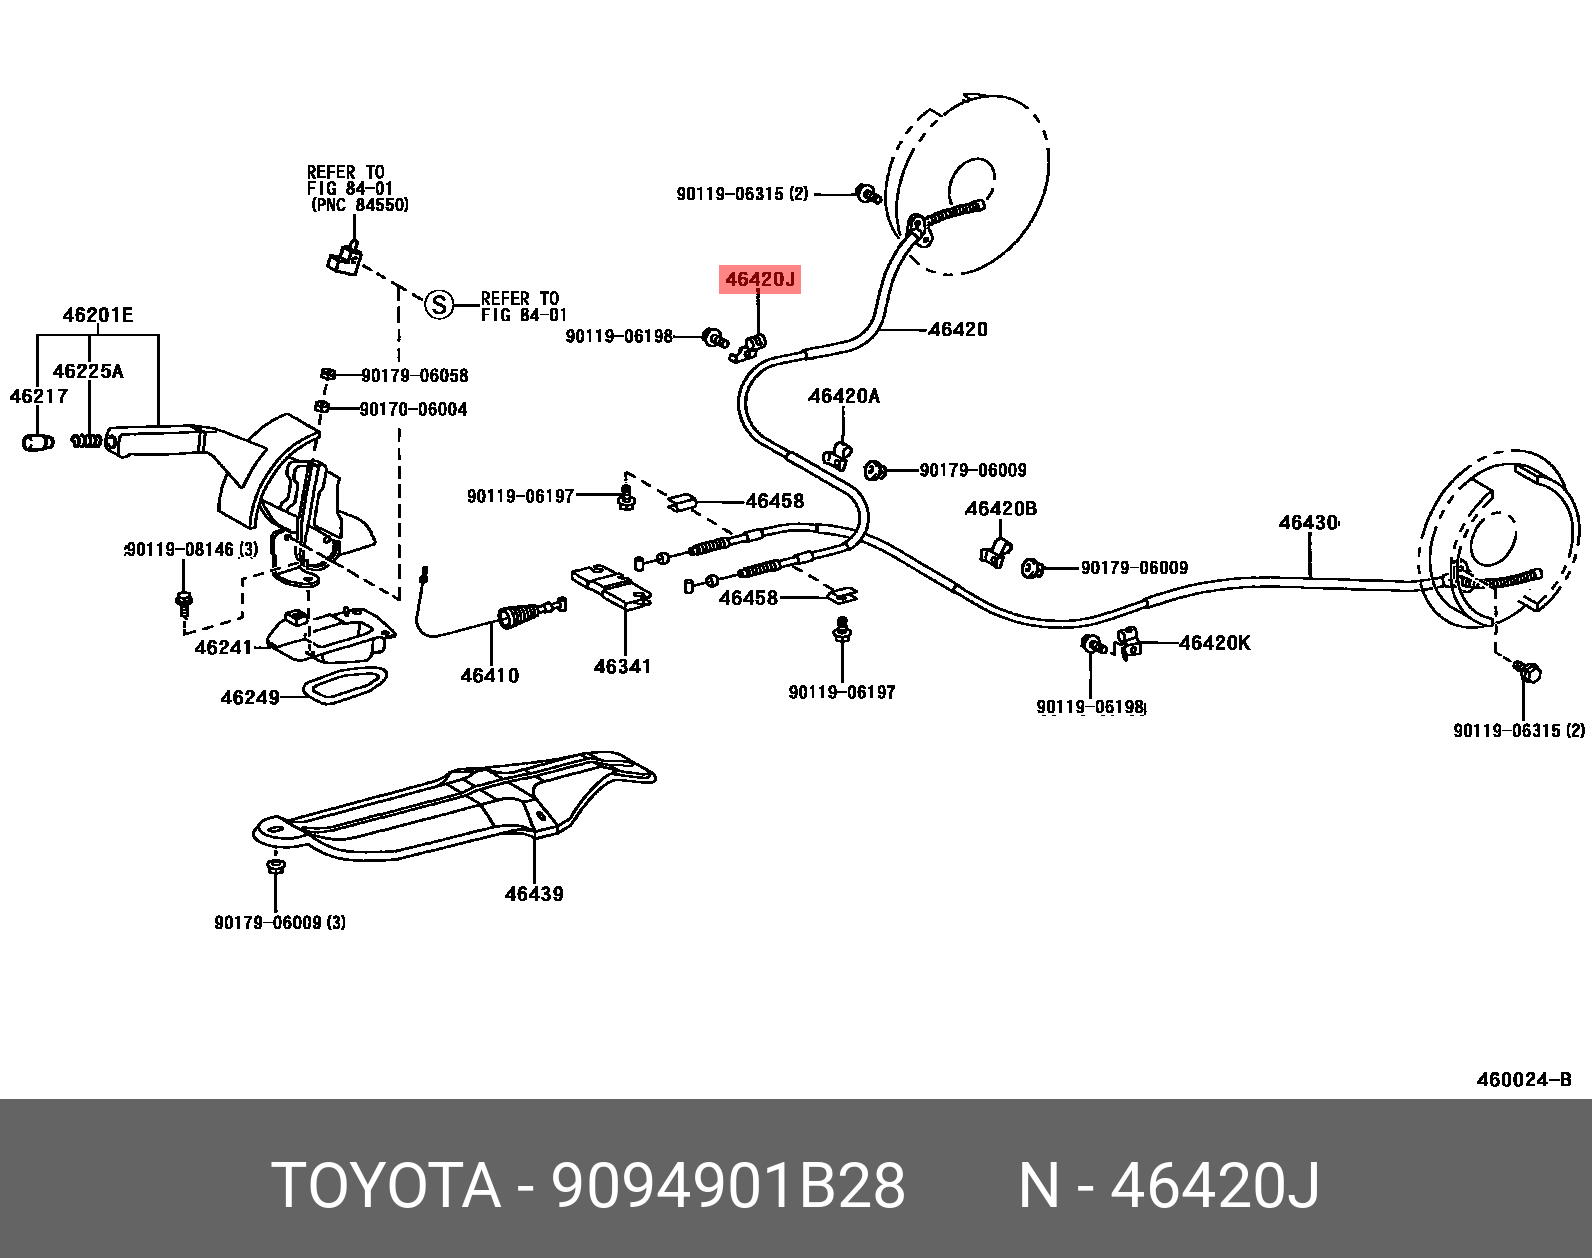 CAMRY 200109 - 200601, CLAMP, NO.3(FOR PARKING BRAKE CABLE)